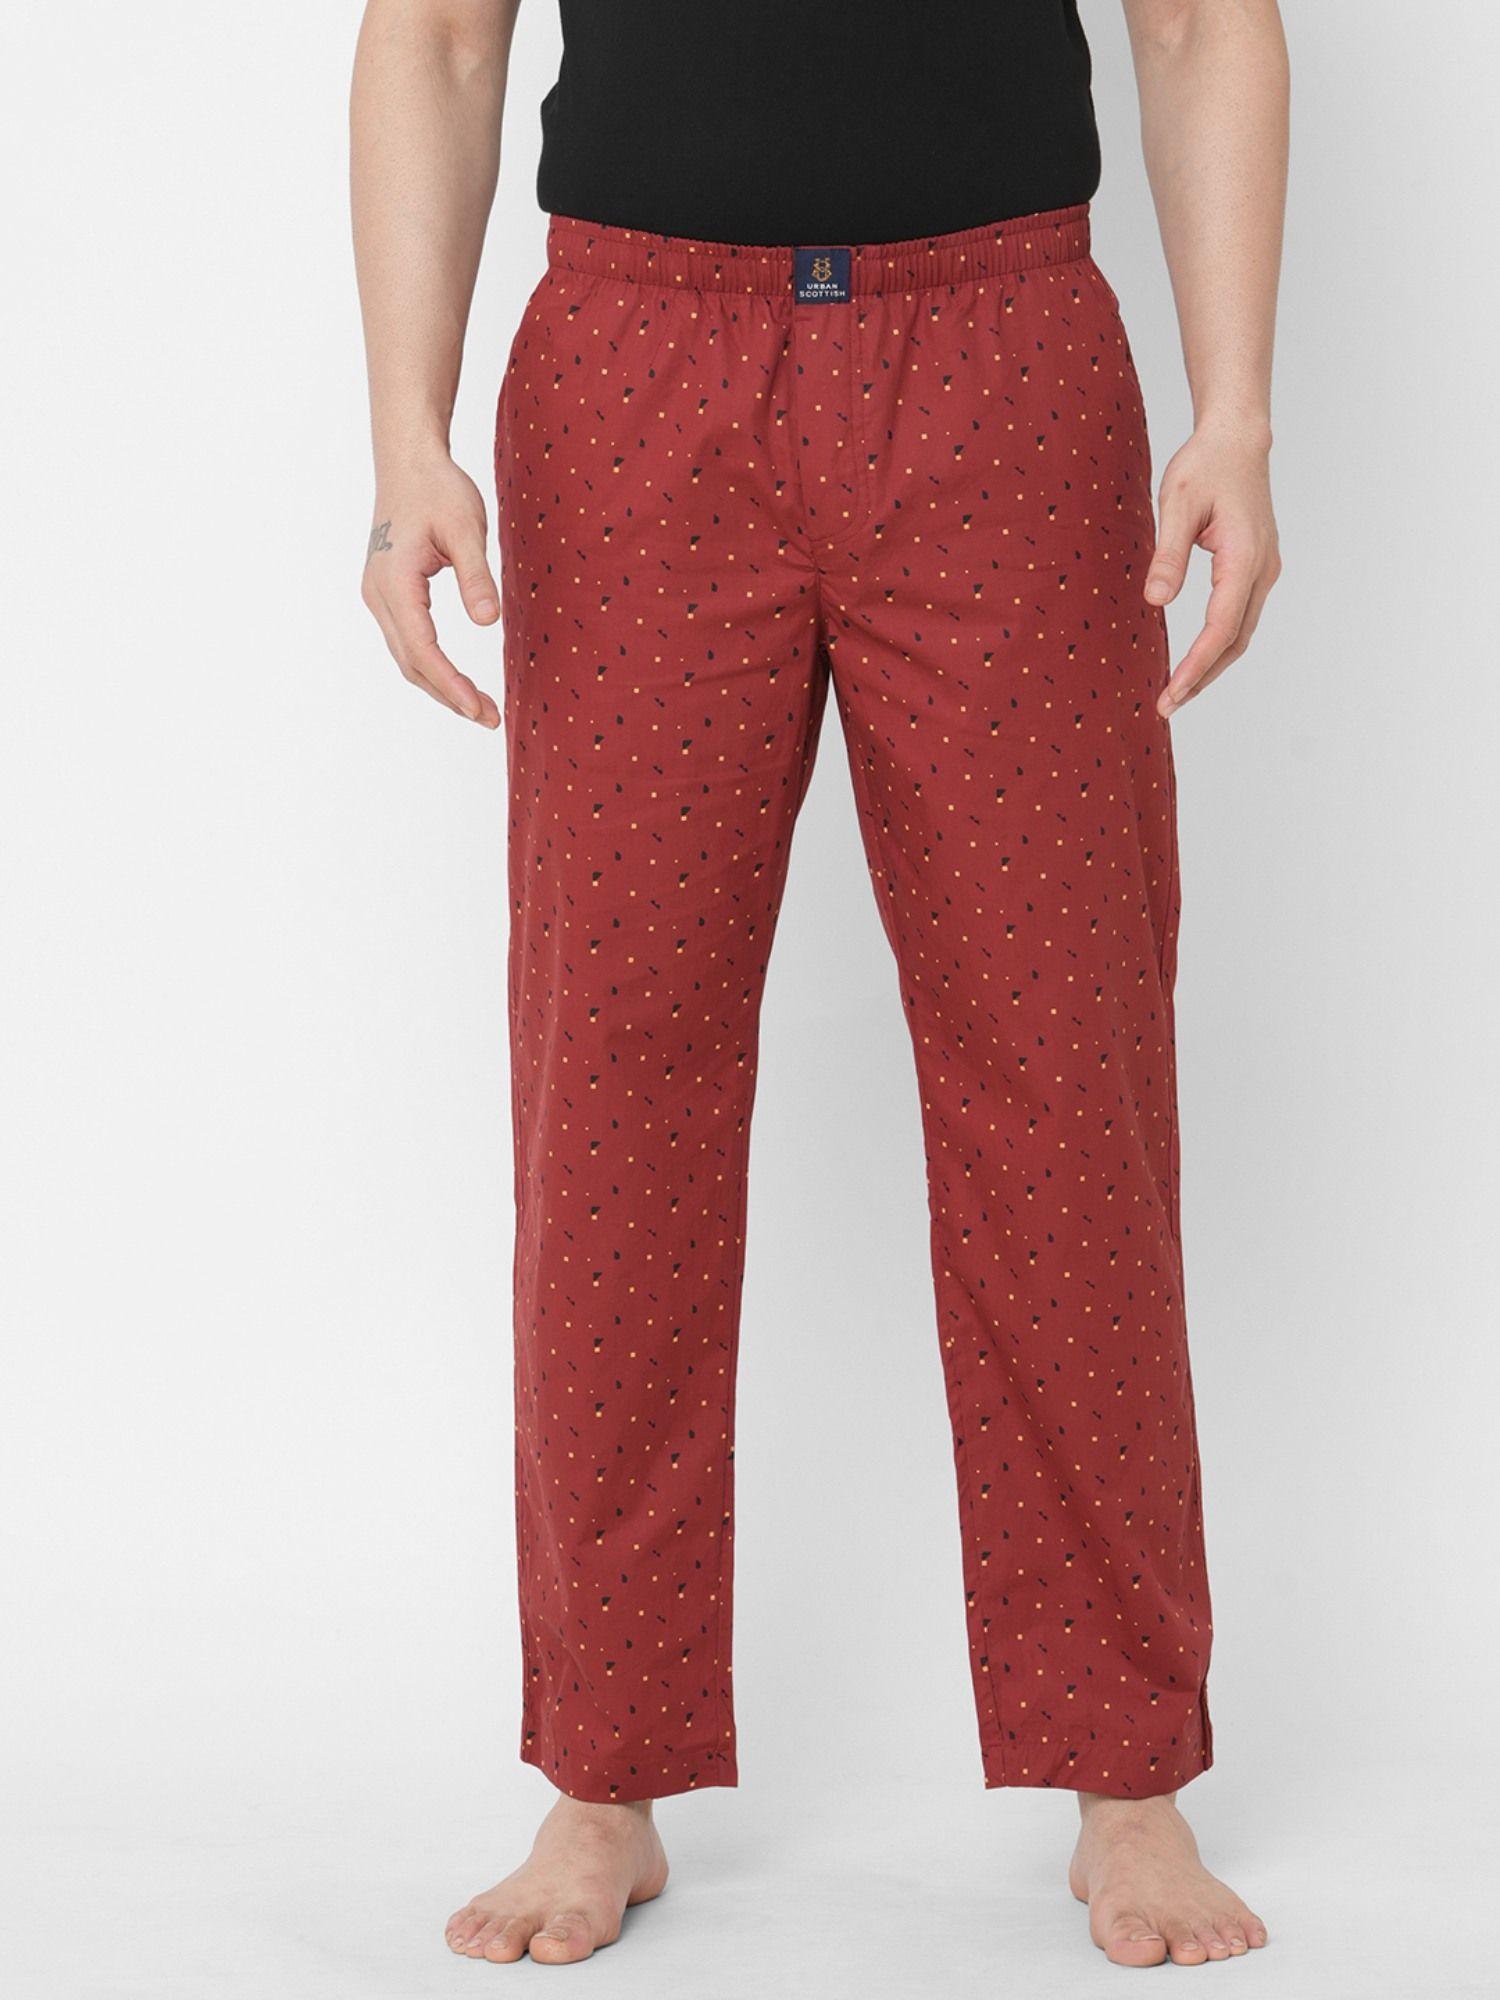 mens printed woven cotton ultra soft pyjama with pockets wine